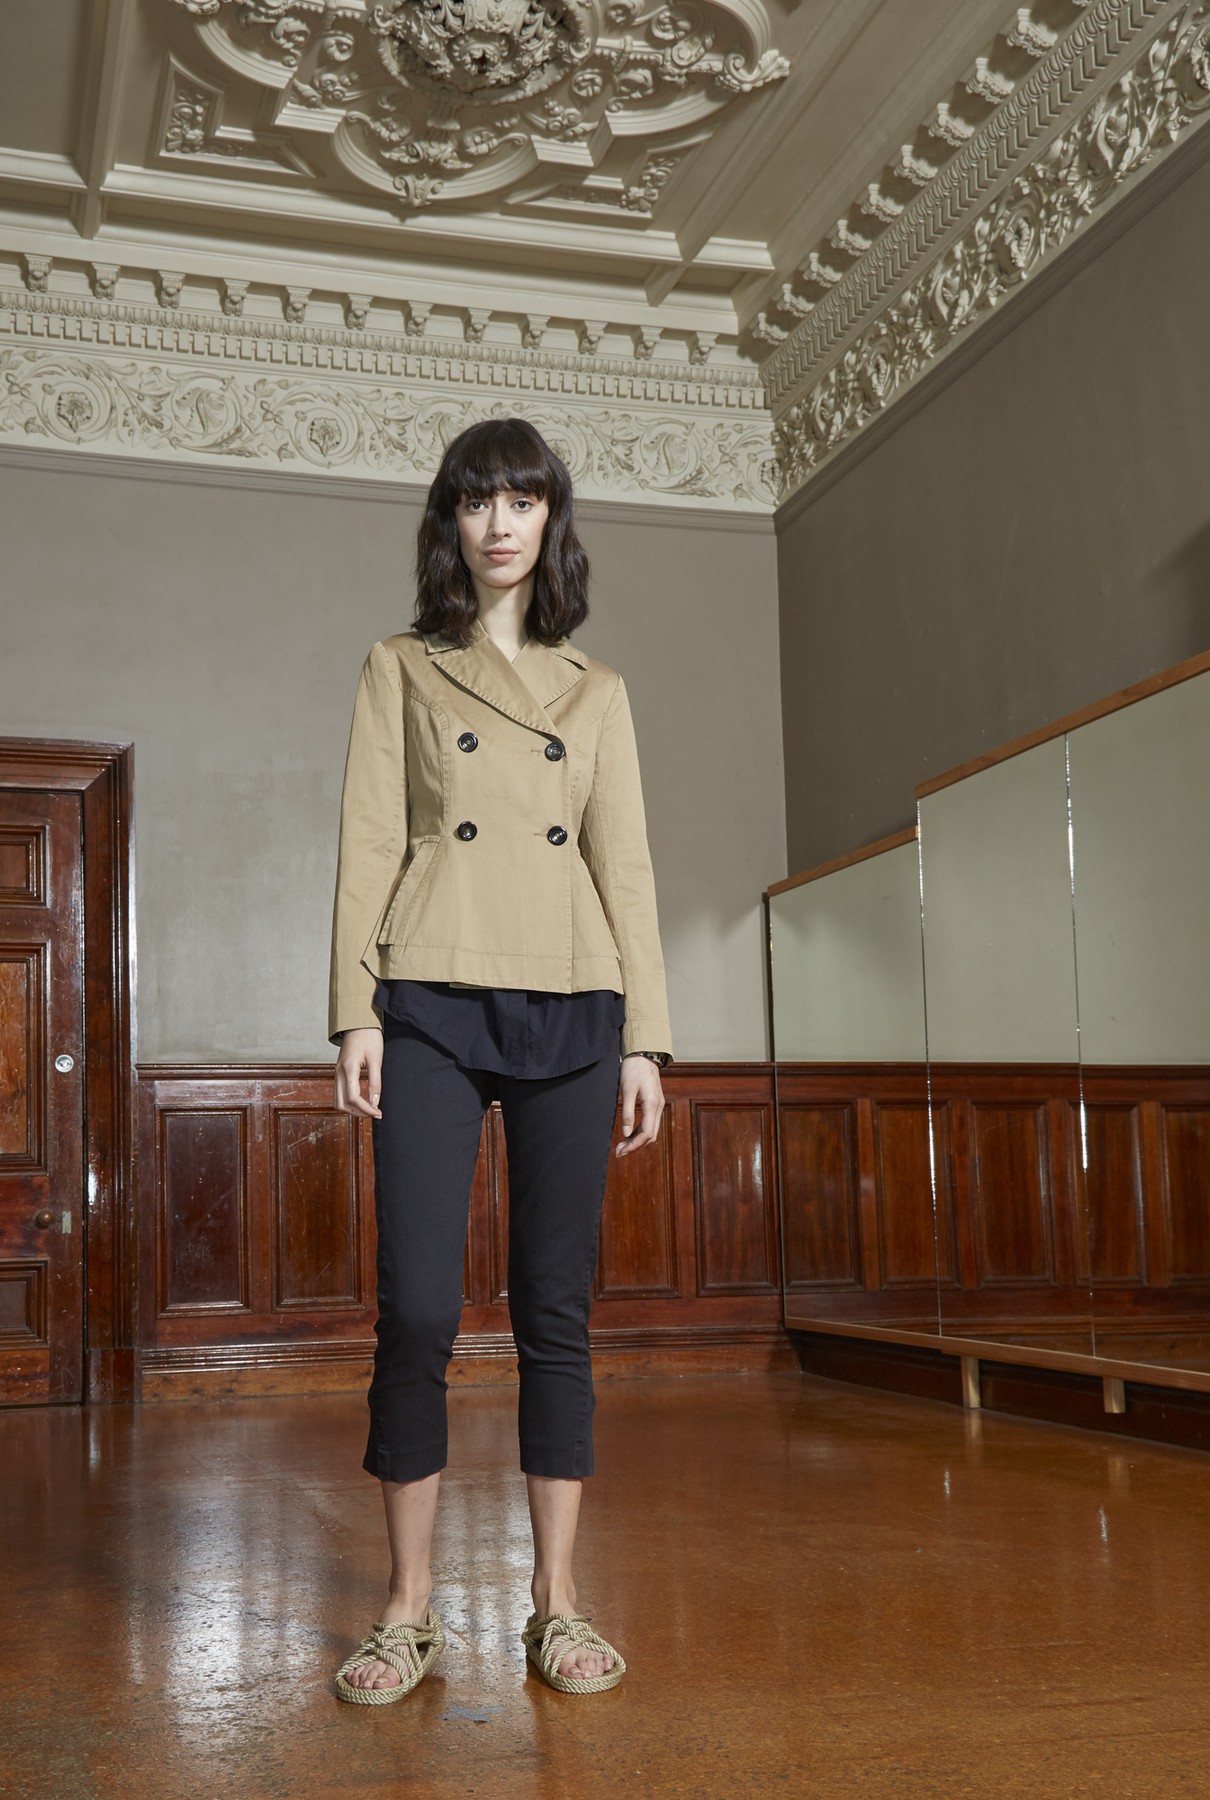 belle jacket/sand
high noon shirt/black
ankle grazer pant/french navy with black